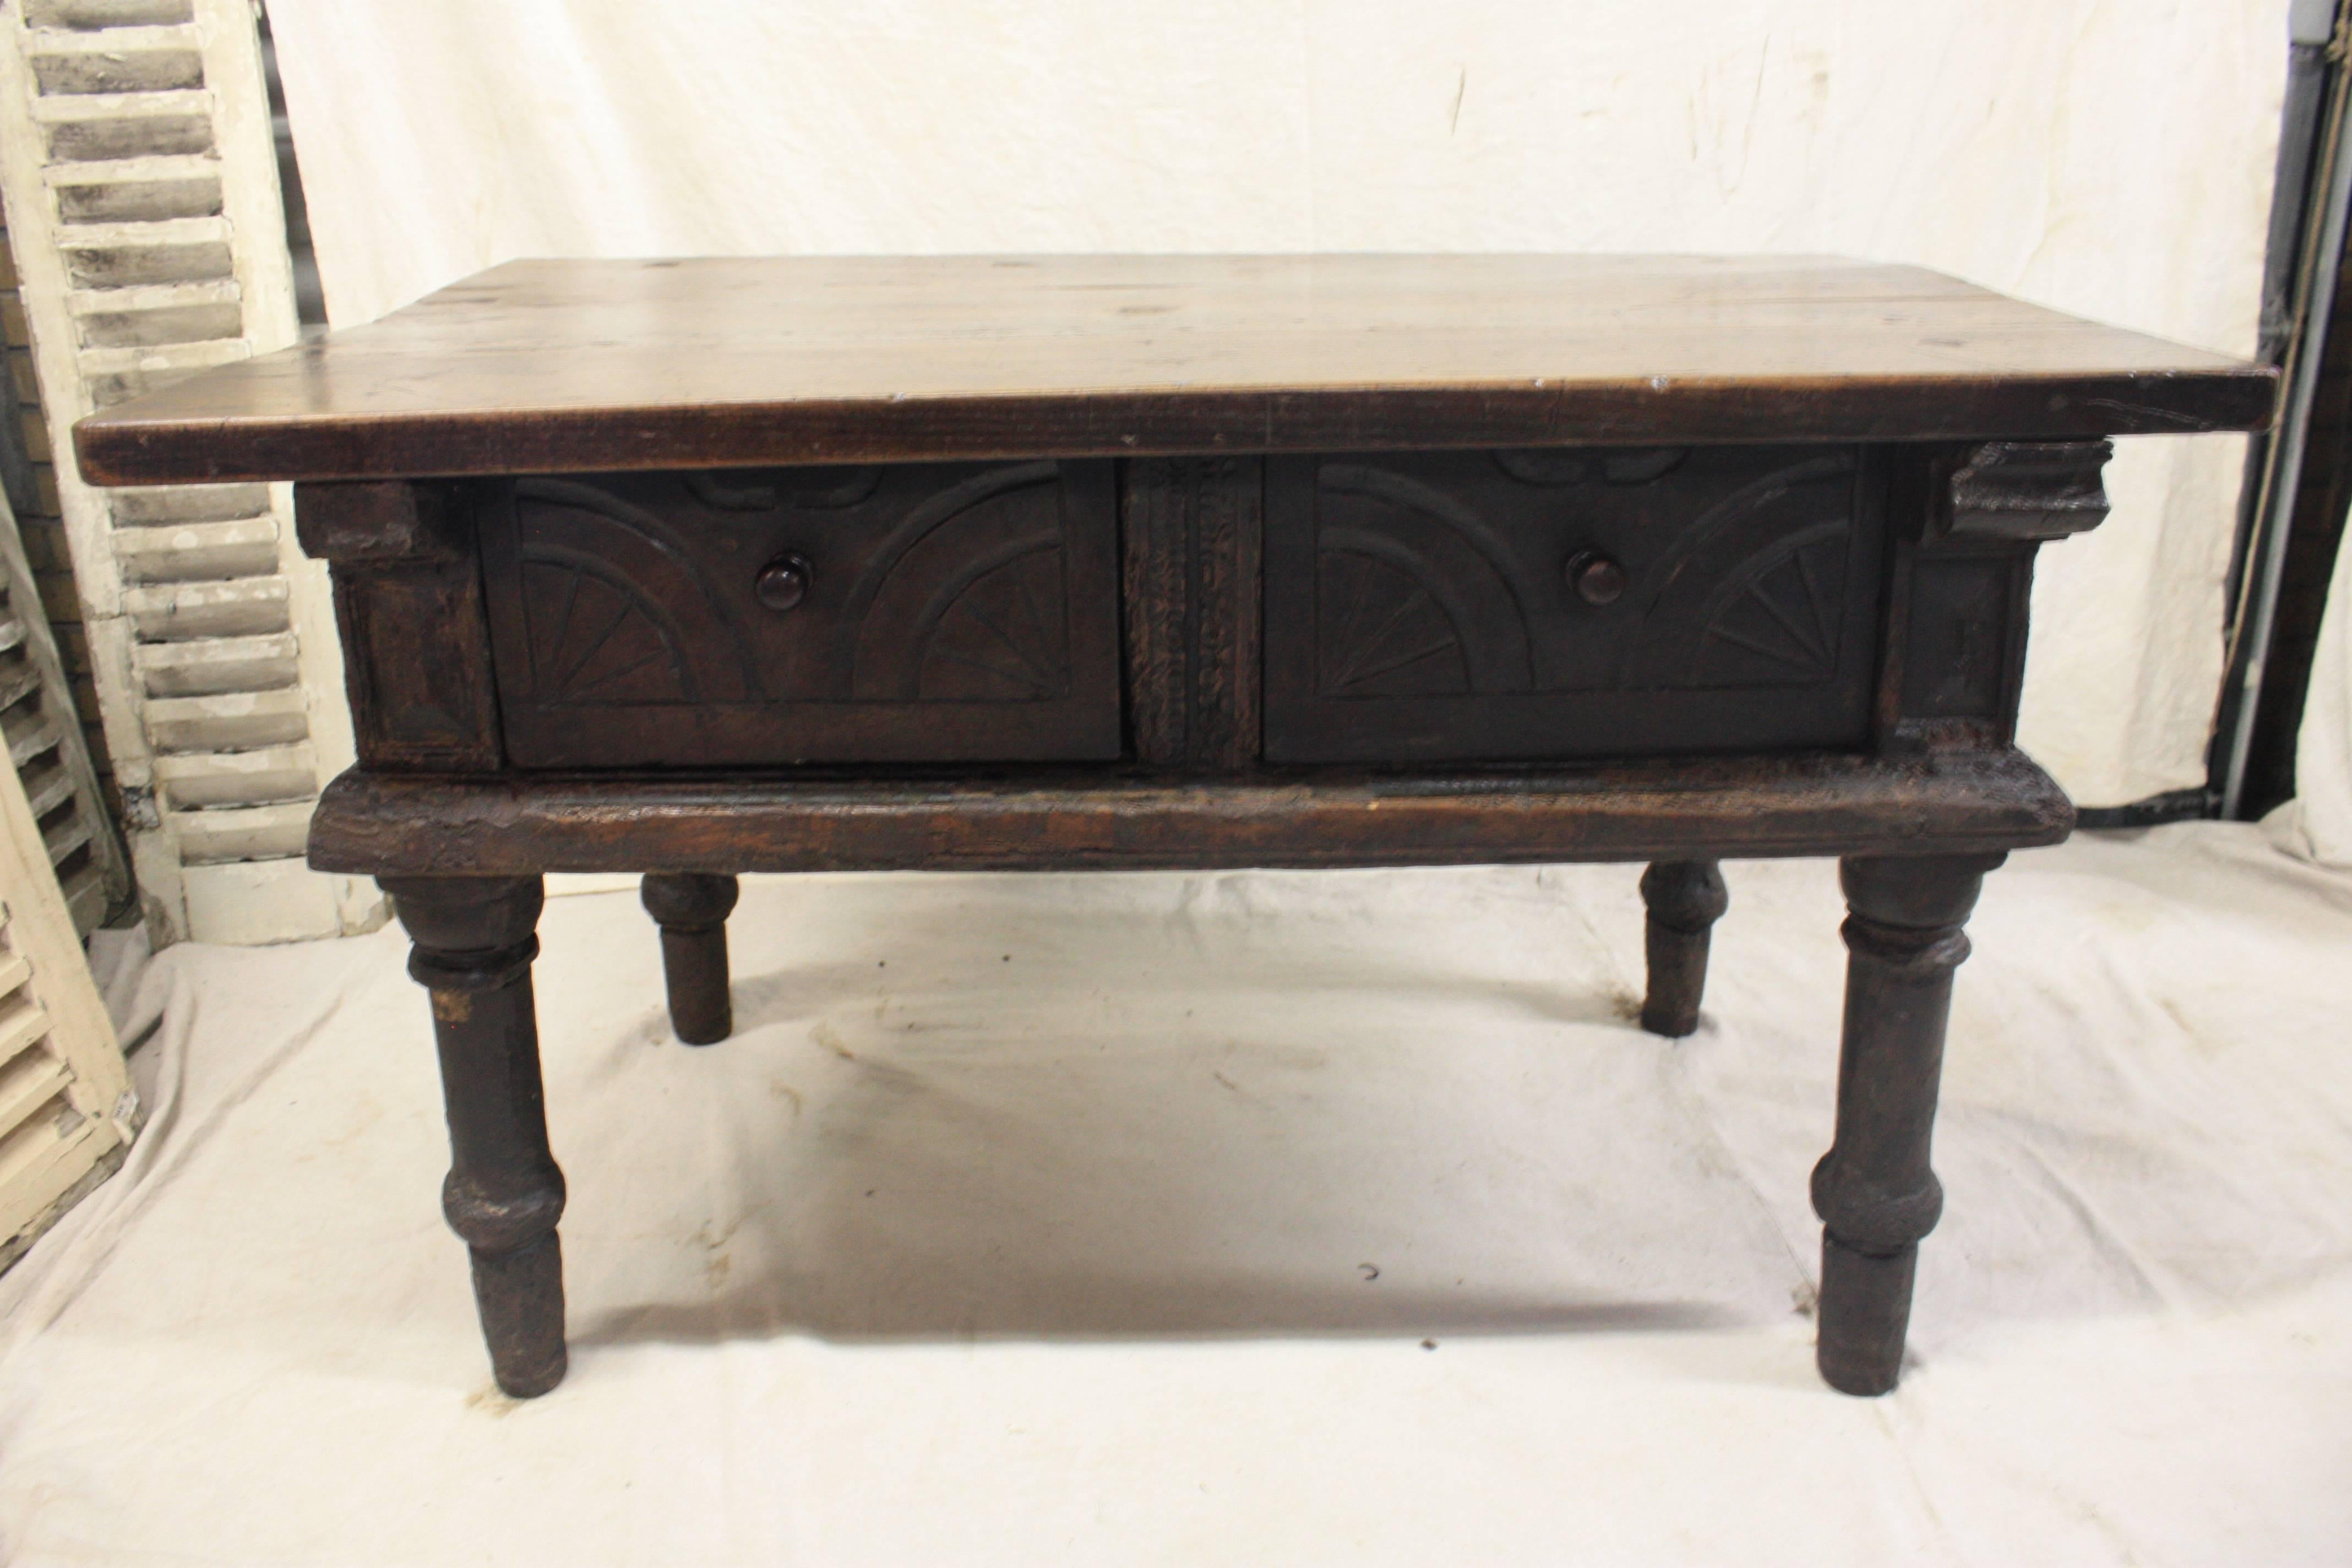 16th century Rustic French table. Hand-carved all along the belt.